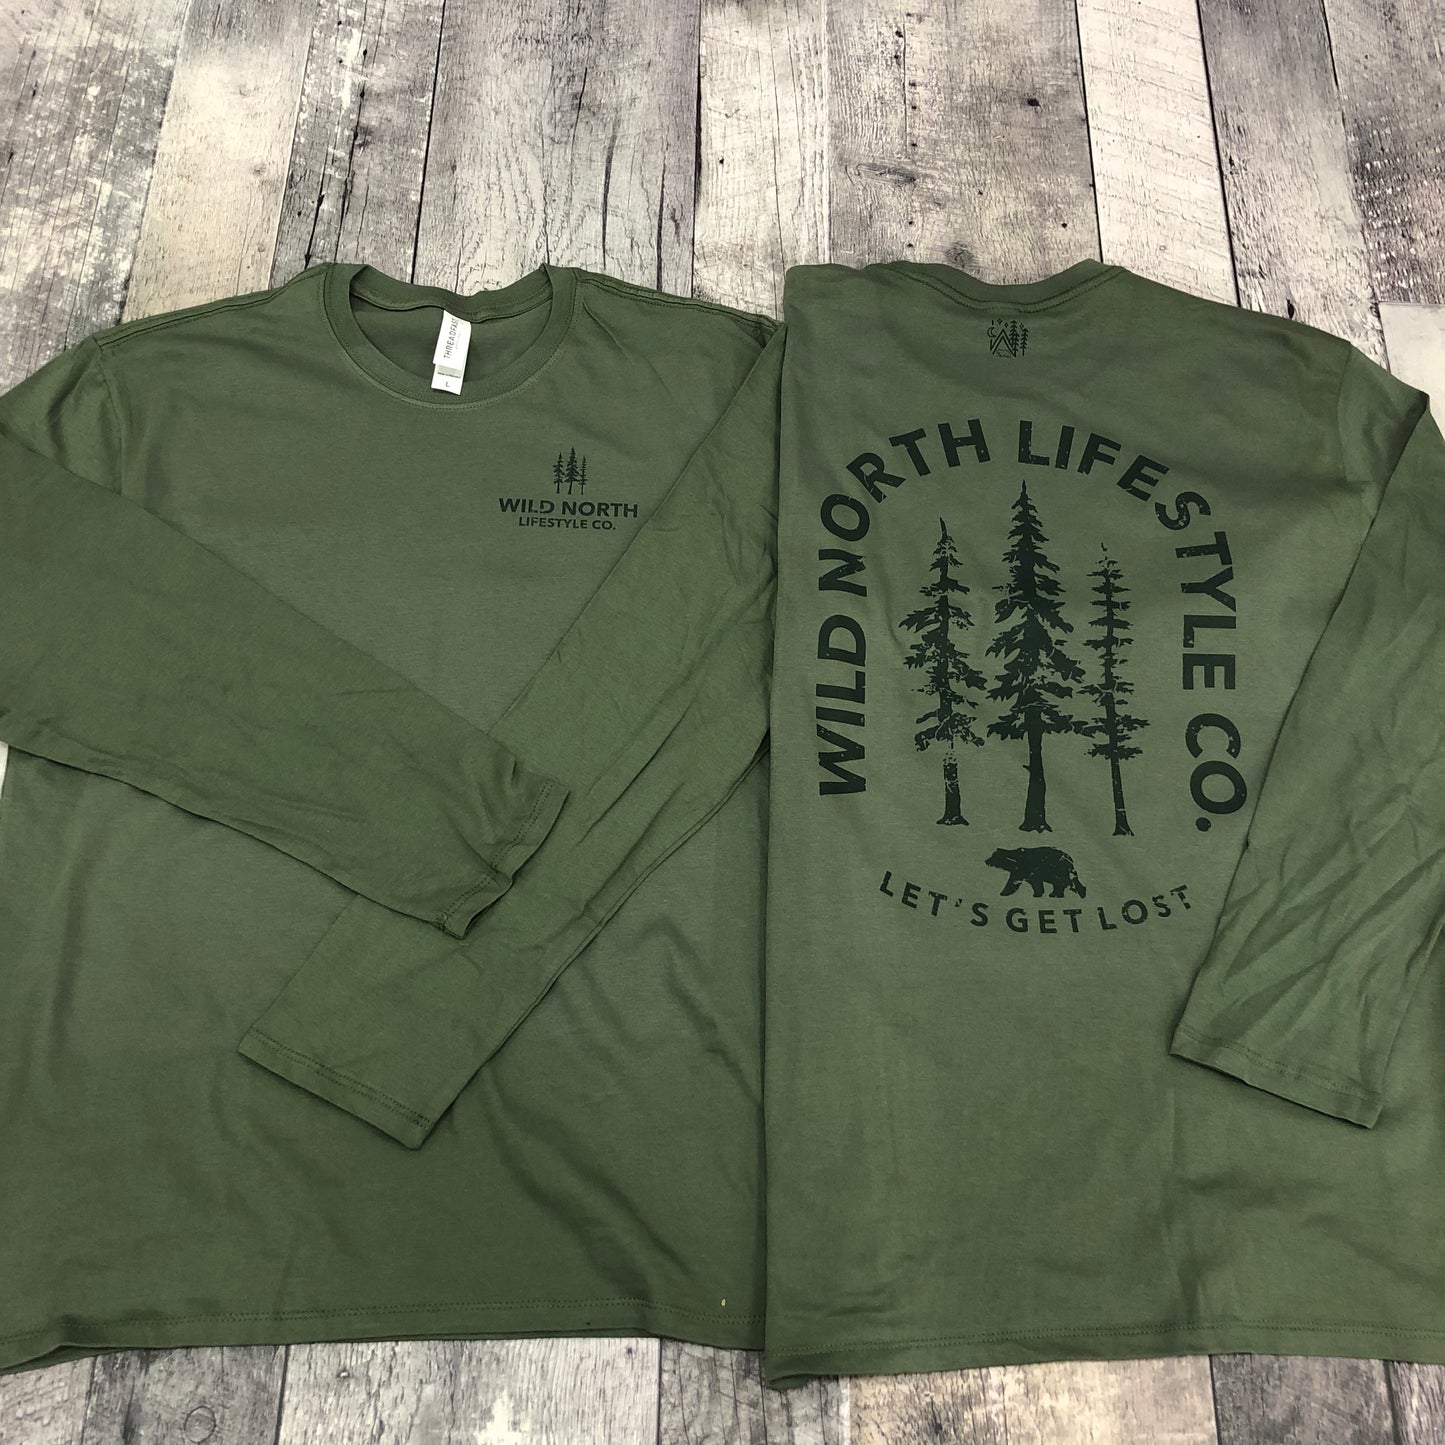 Let's Get Lost Long Sleeve T UNISEX - Army Green